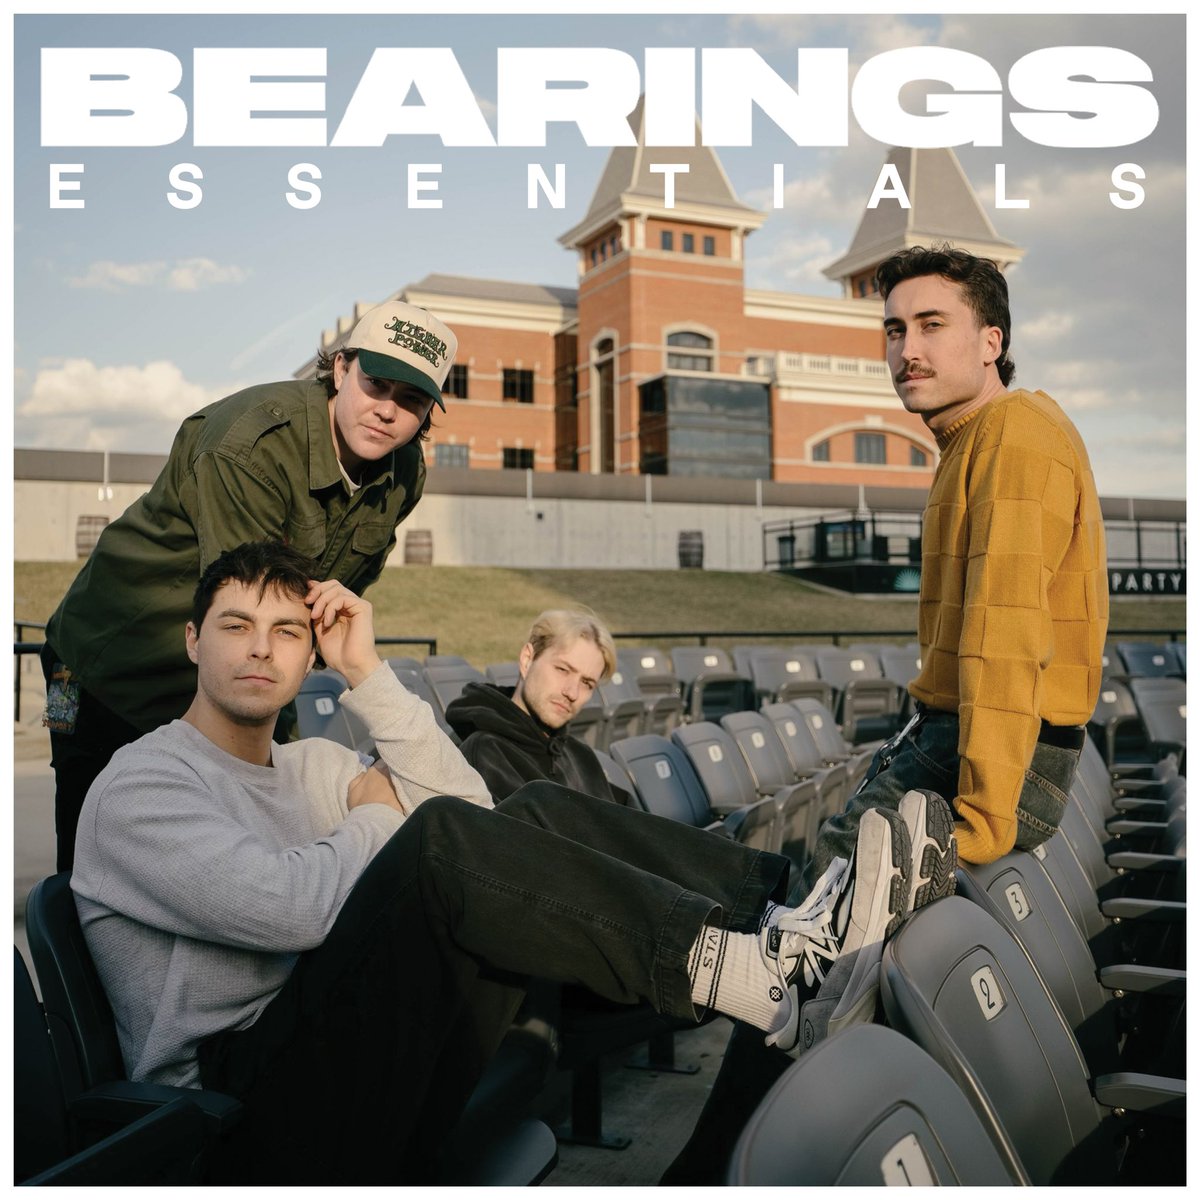 The “Bearings Essentials” playlist is here. Kinda like a greatest hits album? All the bangers in one place. Share with your friends! Spotify: open.spotify.com/playlist/4IeIf… Apple: music.apple.com/us/playlist/be…